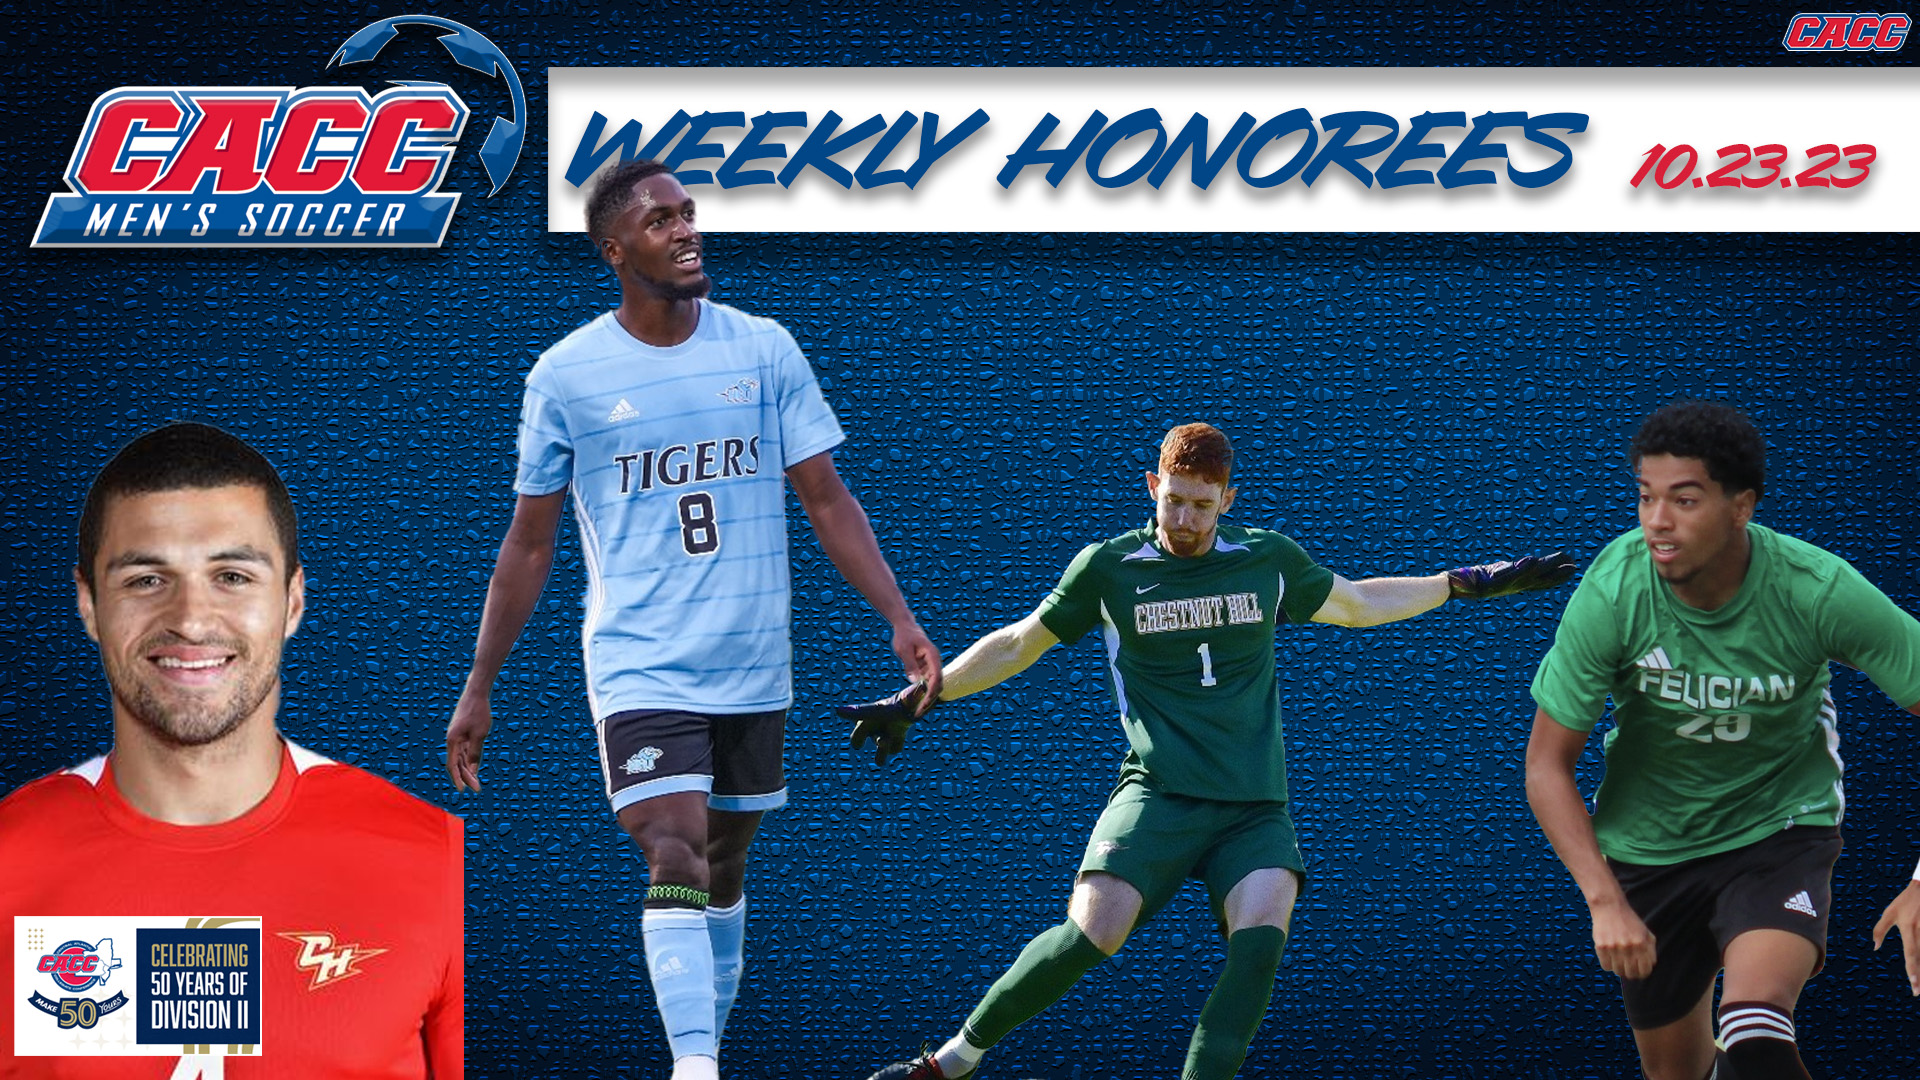 CACC Men's Soccer Weekly Honorees (10-23-23)